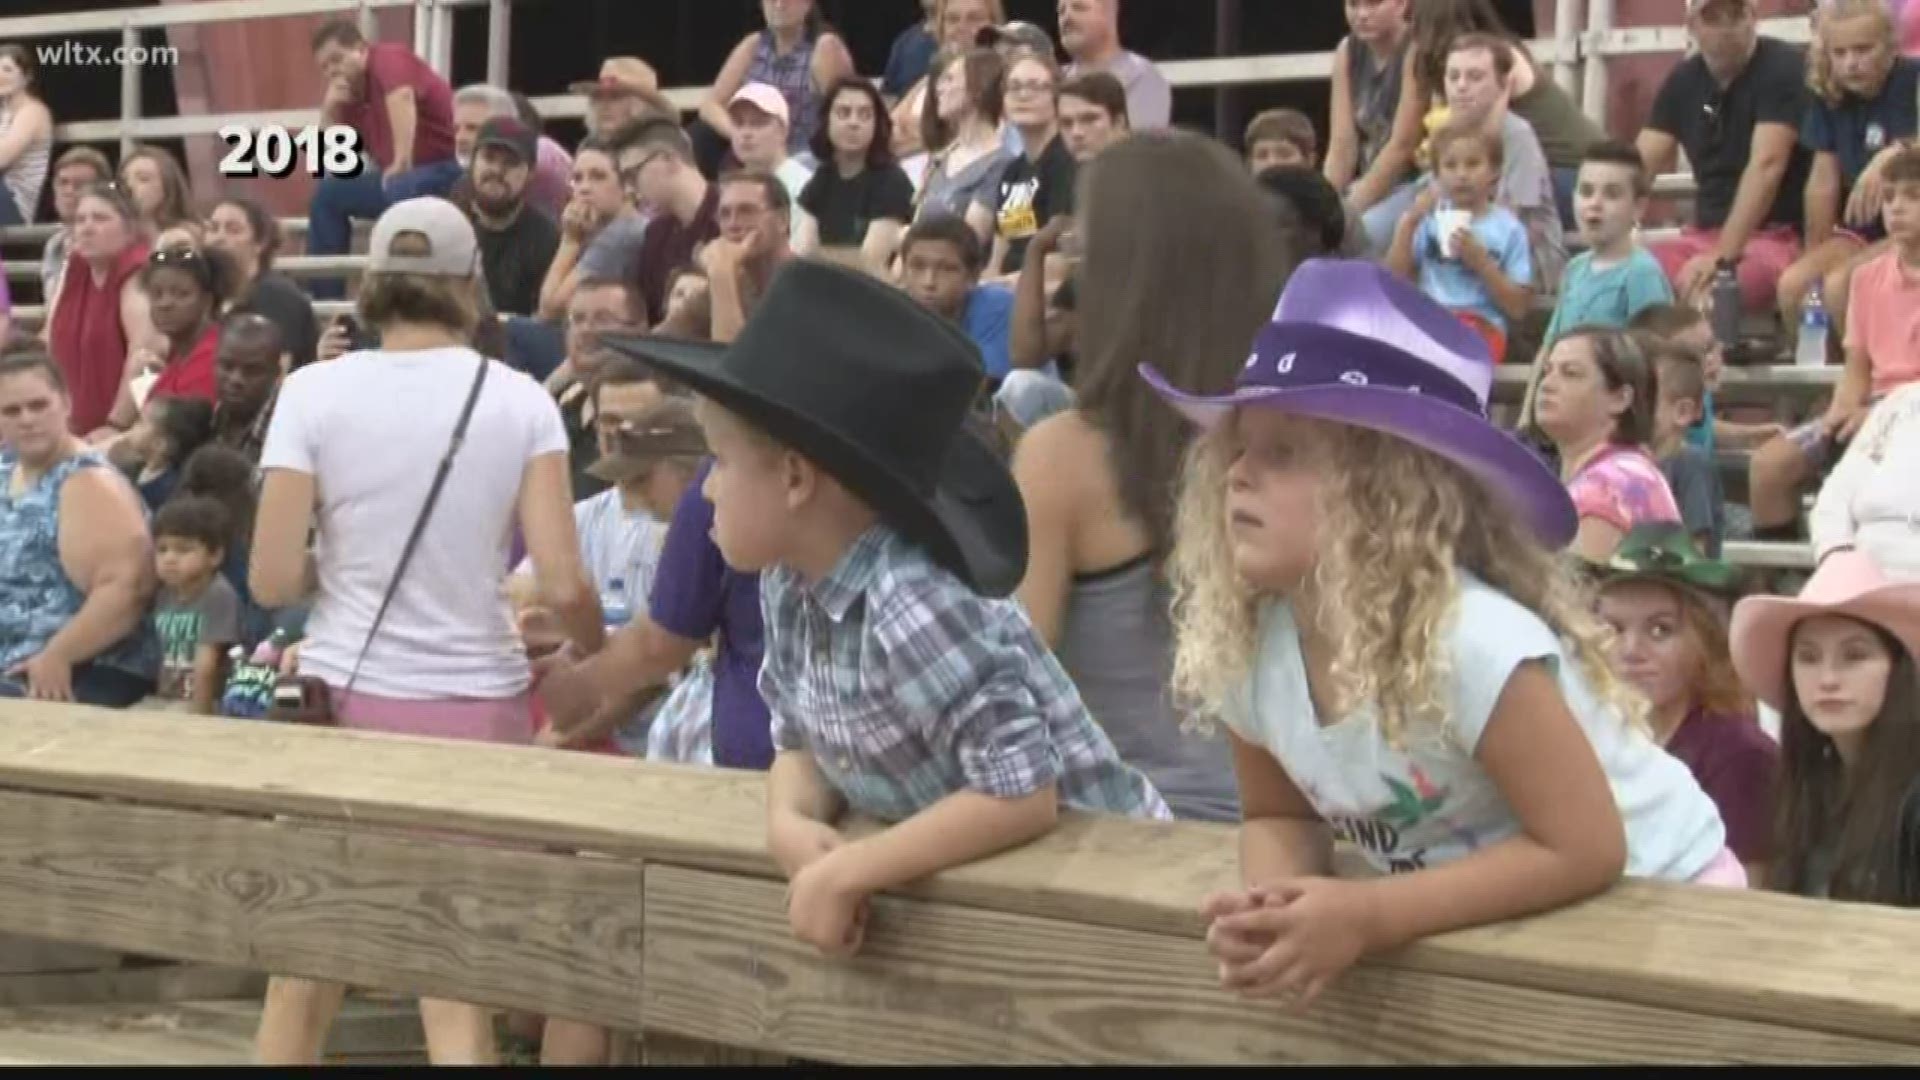 Saddle up for the South Congaree Rodeo this weekend